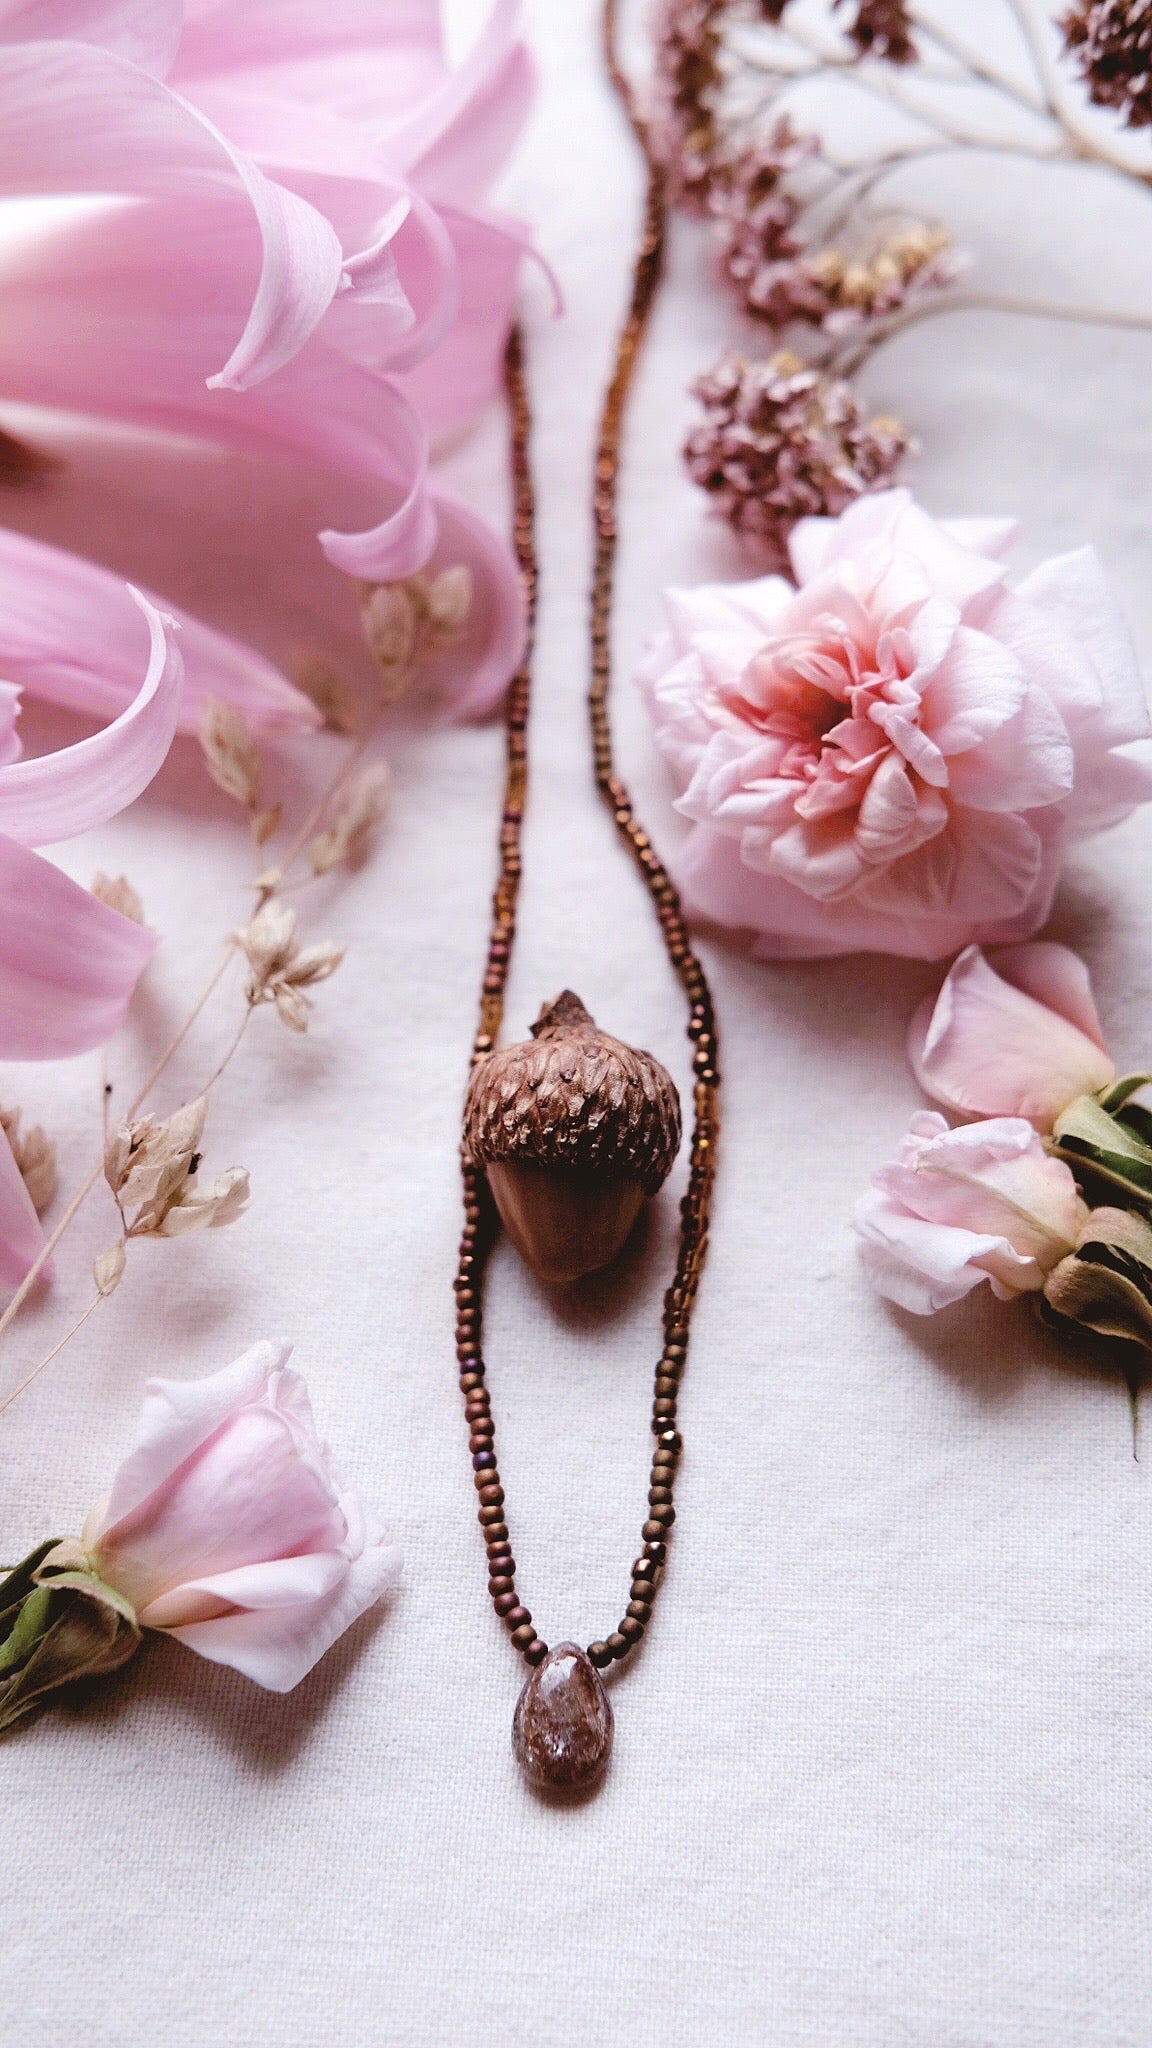 Earthstar + Kyanite + tranquility beaded necklace